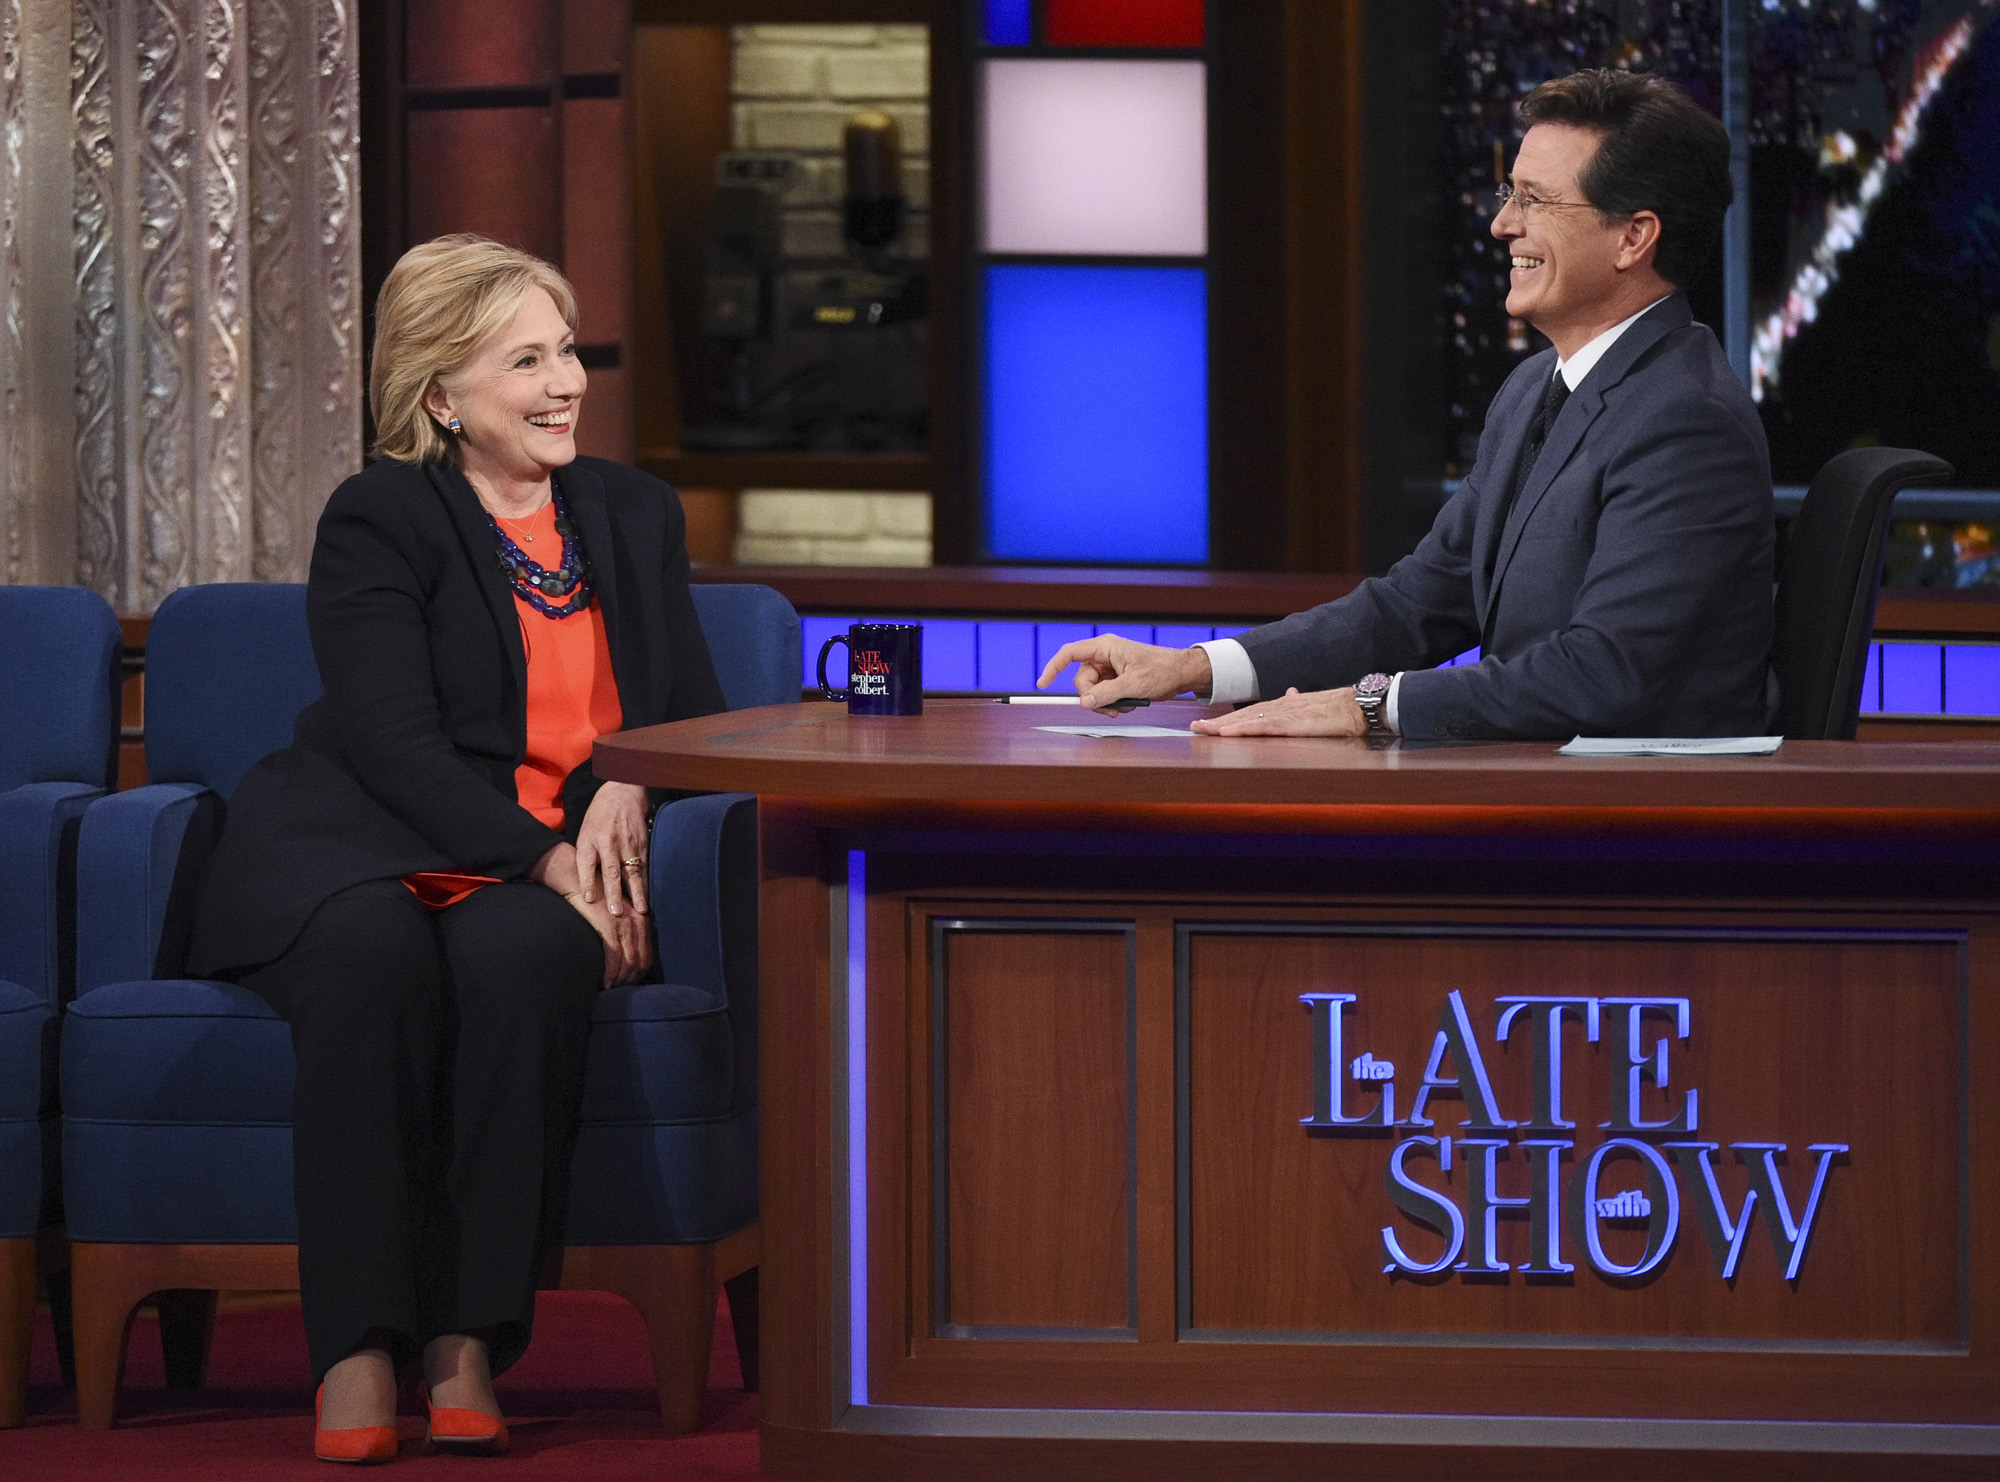 Presidential Candidate Hillary Clinton chats with Stephen on The Late Show with Stephen Colbert on Oct. 27, 2015. (Jeffrey R. Staab—CBS Photo Archive/Getty Images)